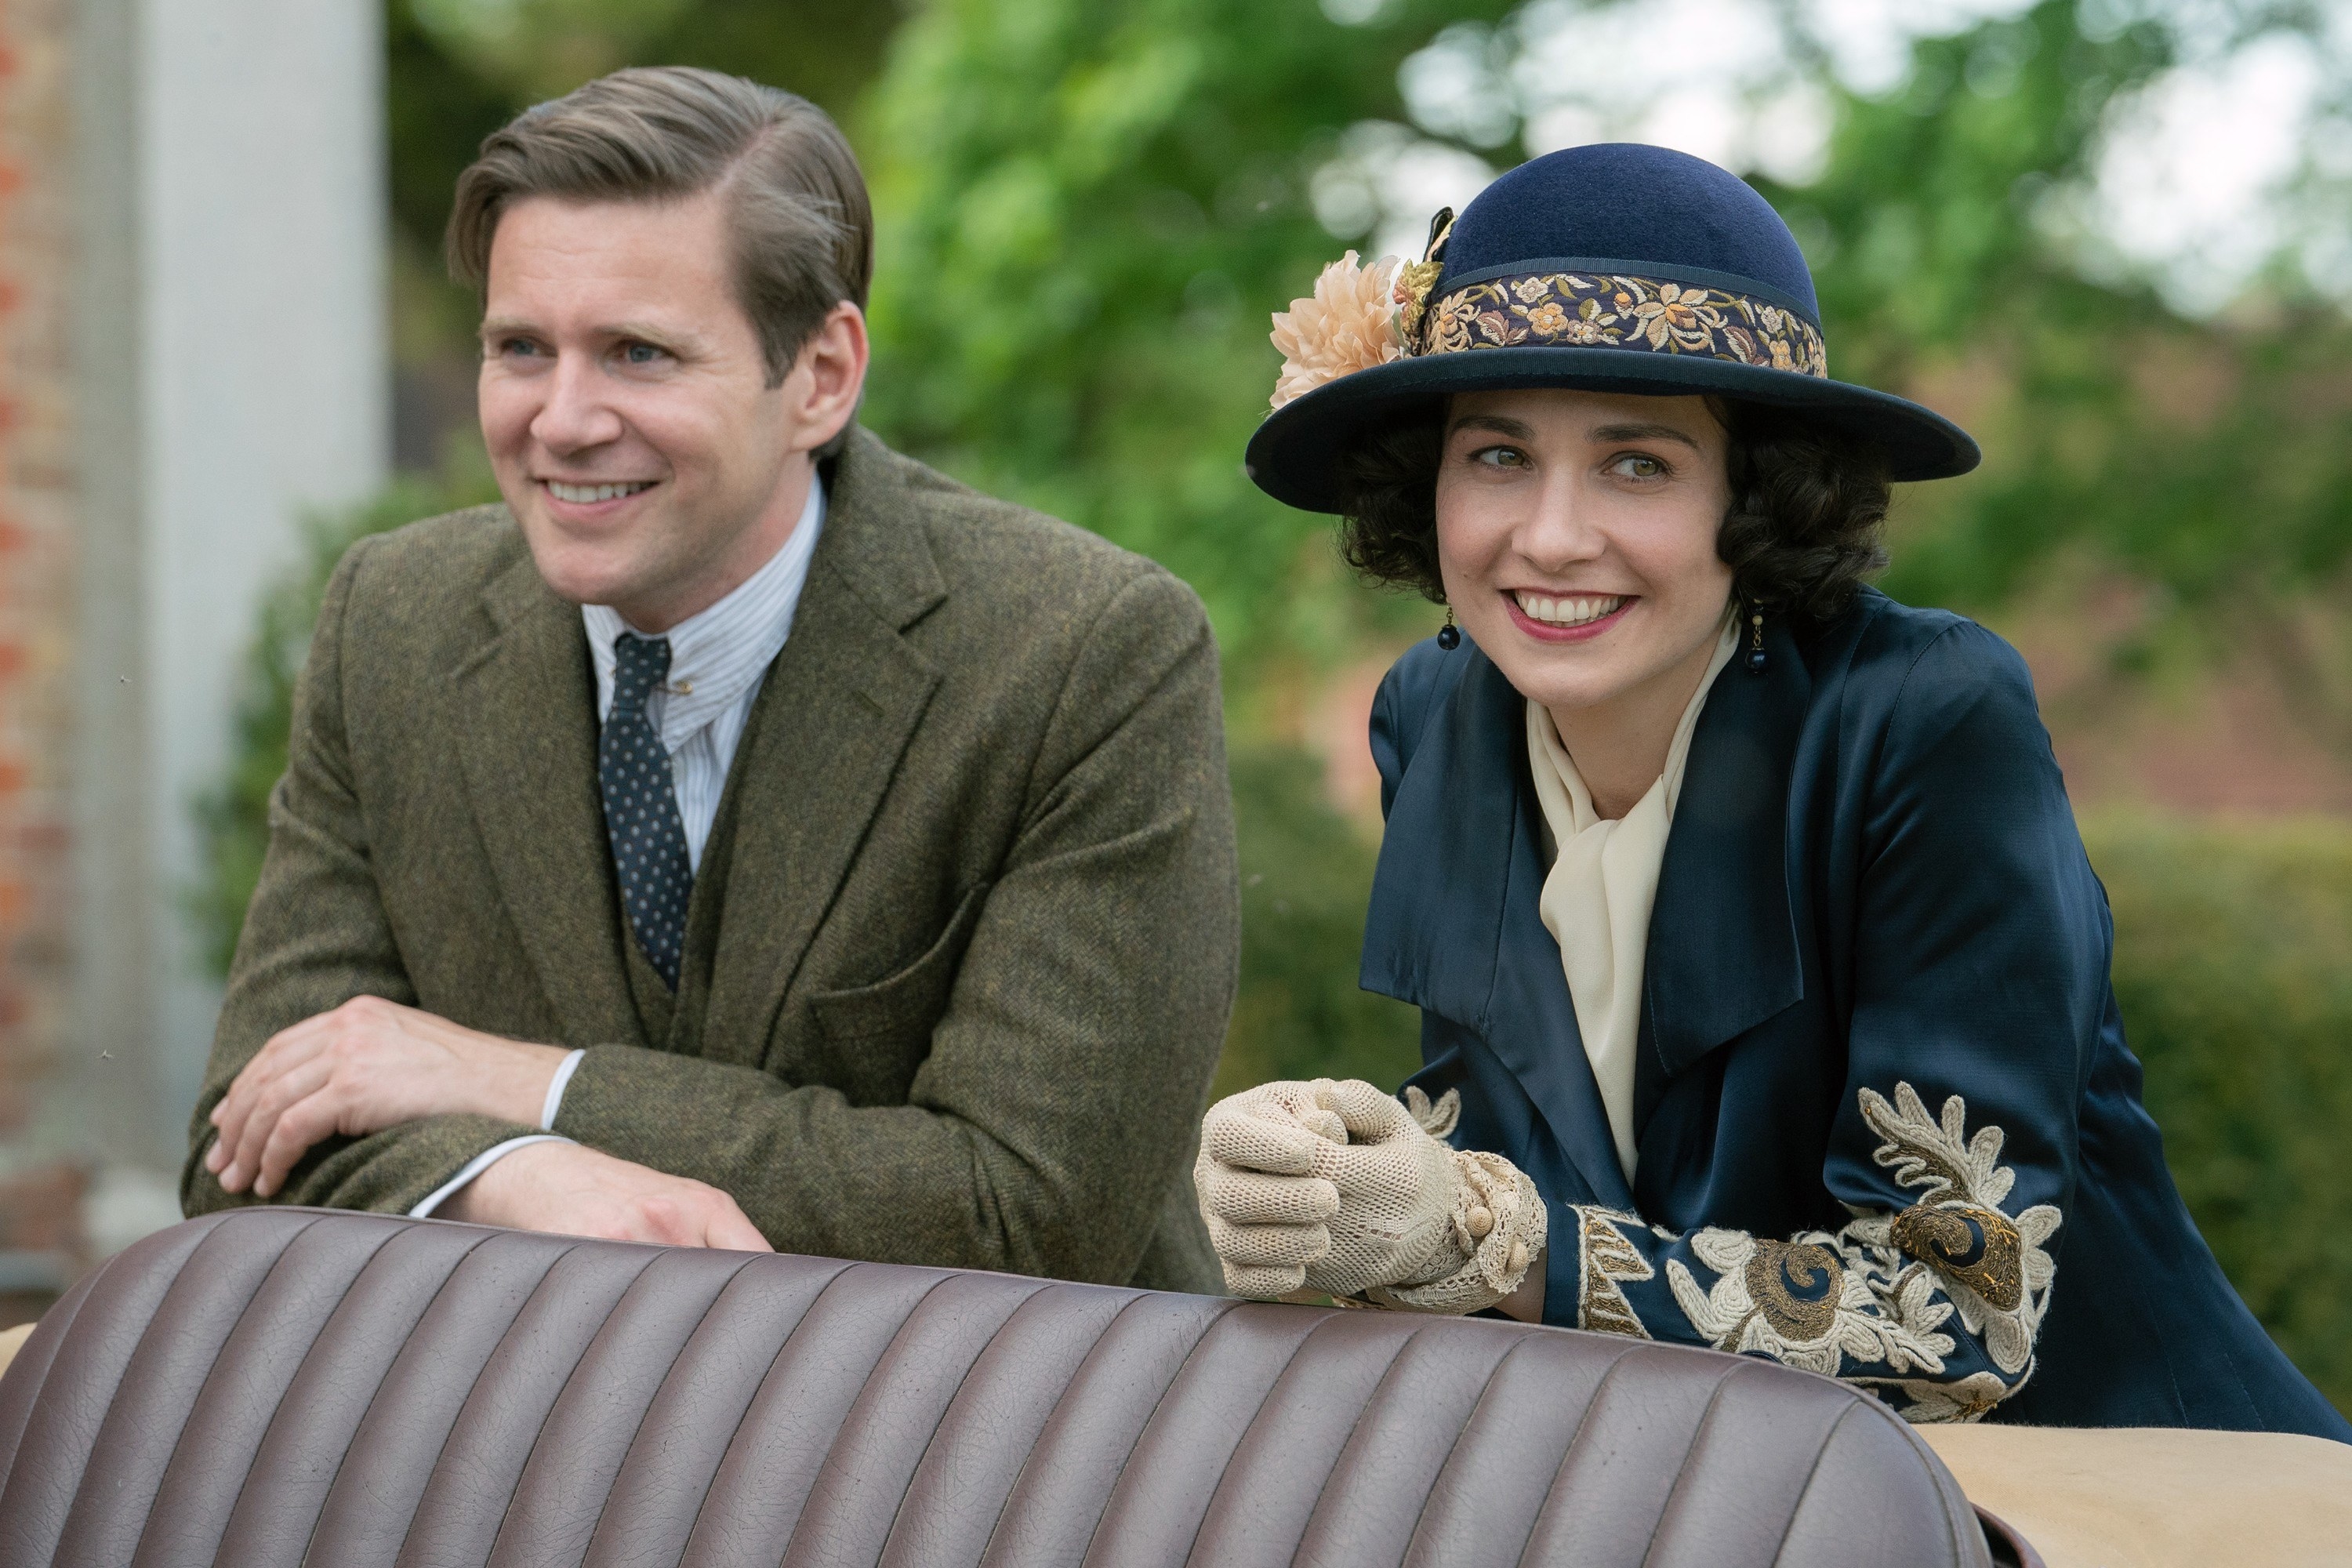 Allen Leech and Tuppence Middleton smiling.